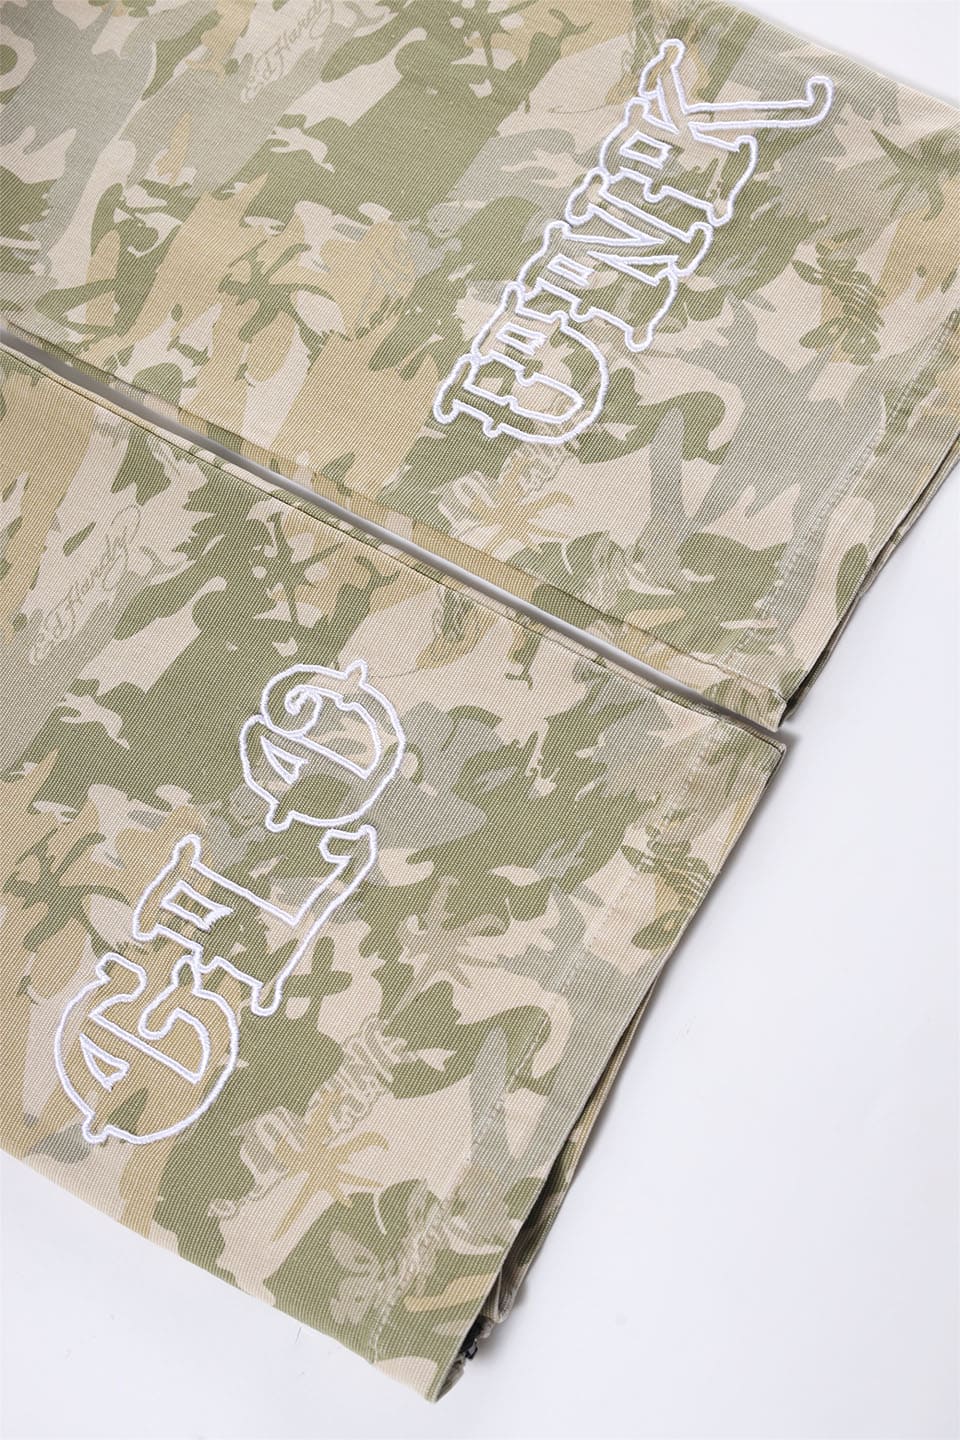 Camo Stacked Cargo Pants